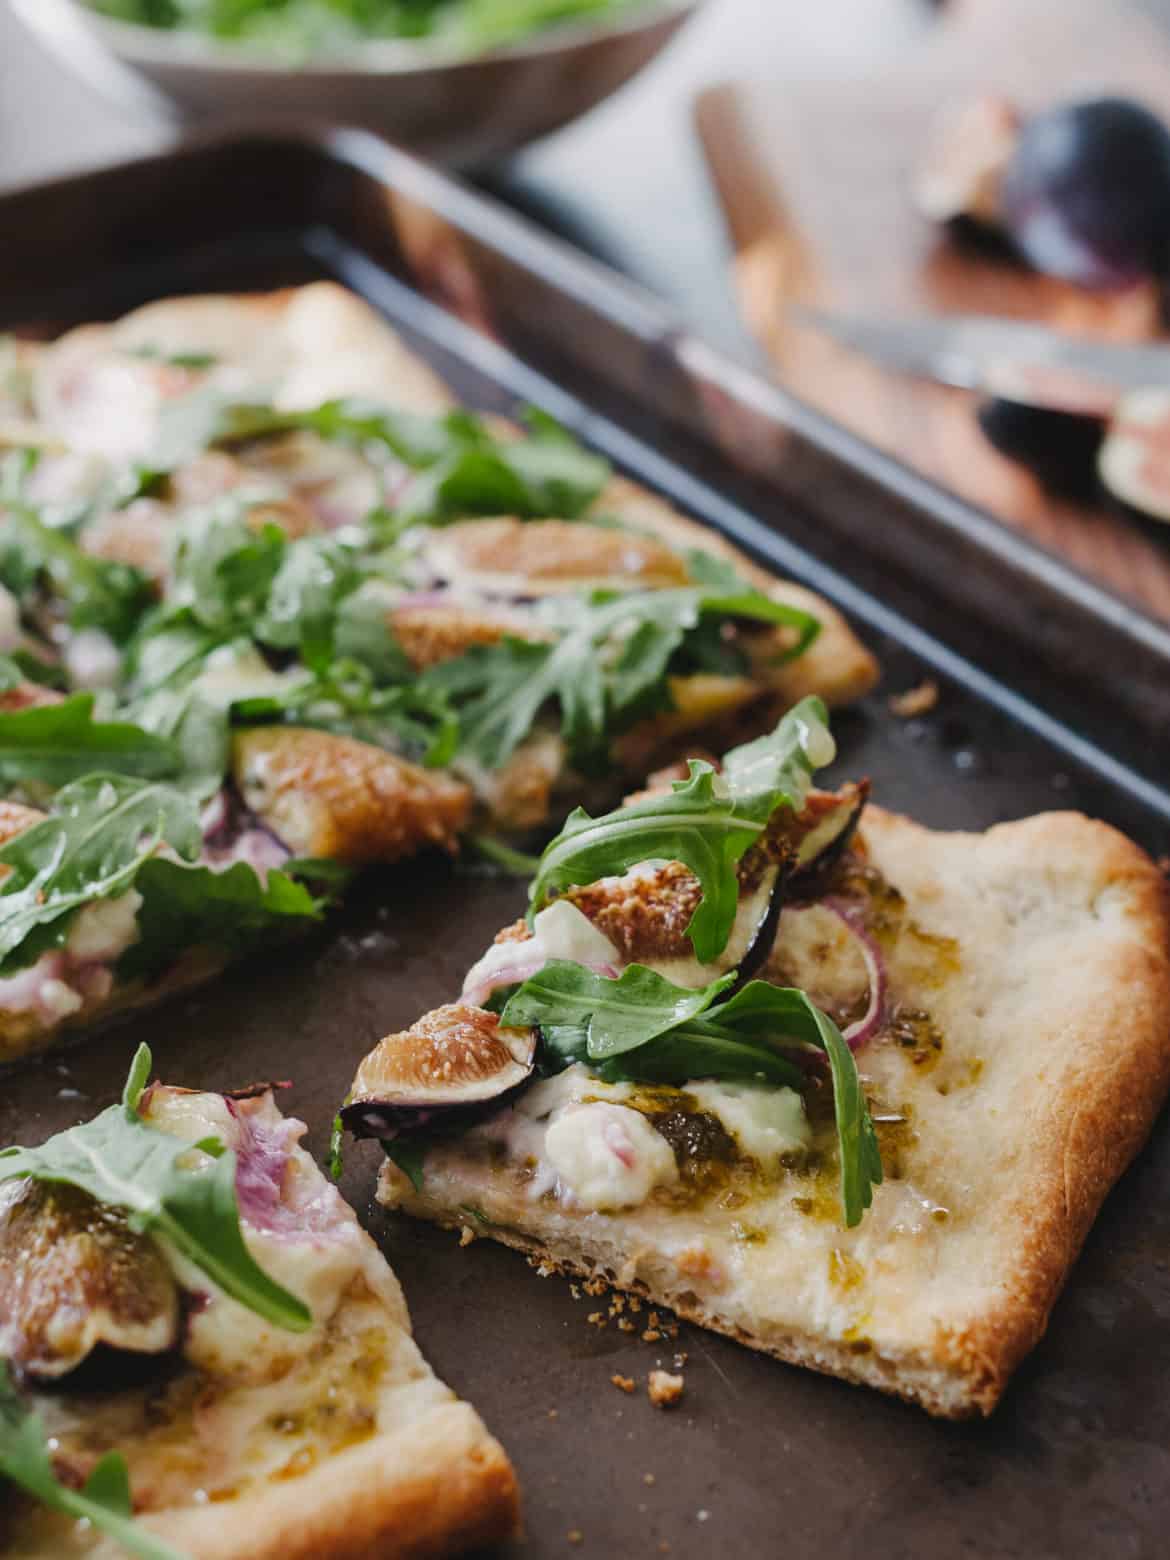 A homemade pizza topped with figs, arugula, blue cheese and jalapeno jam.